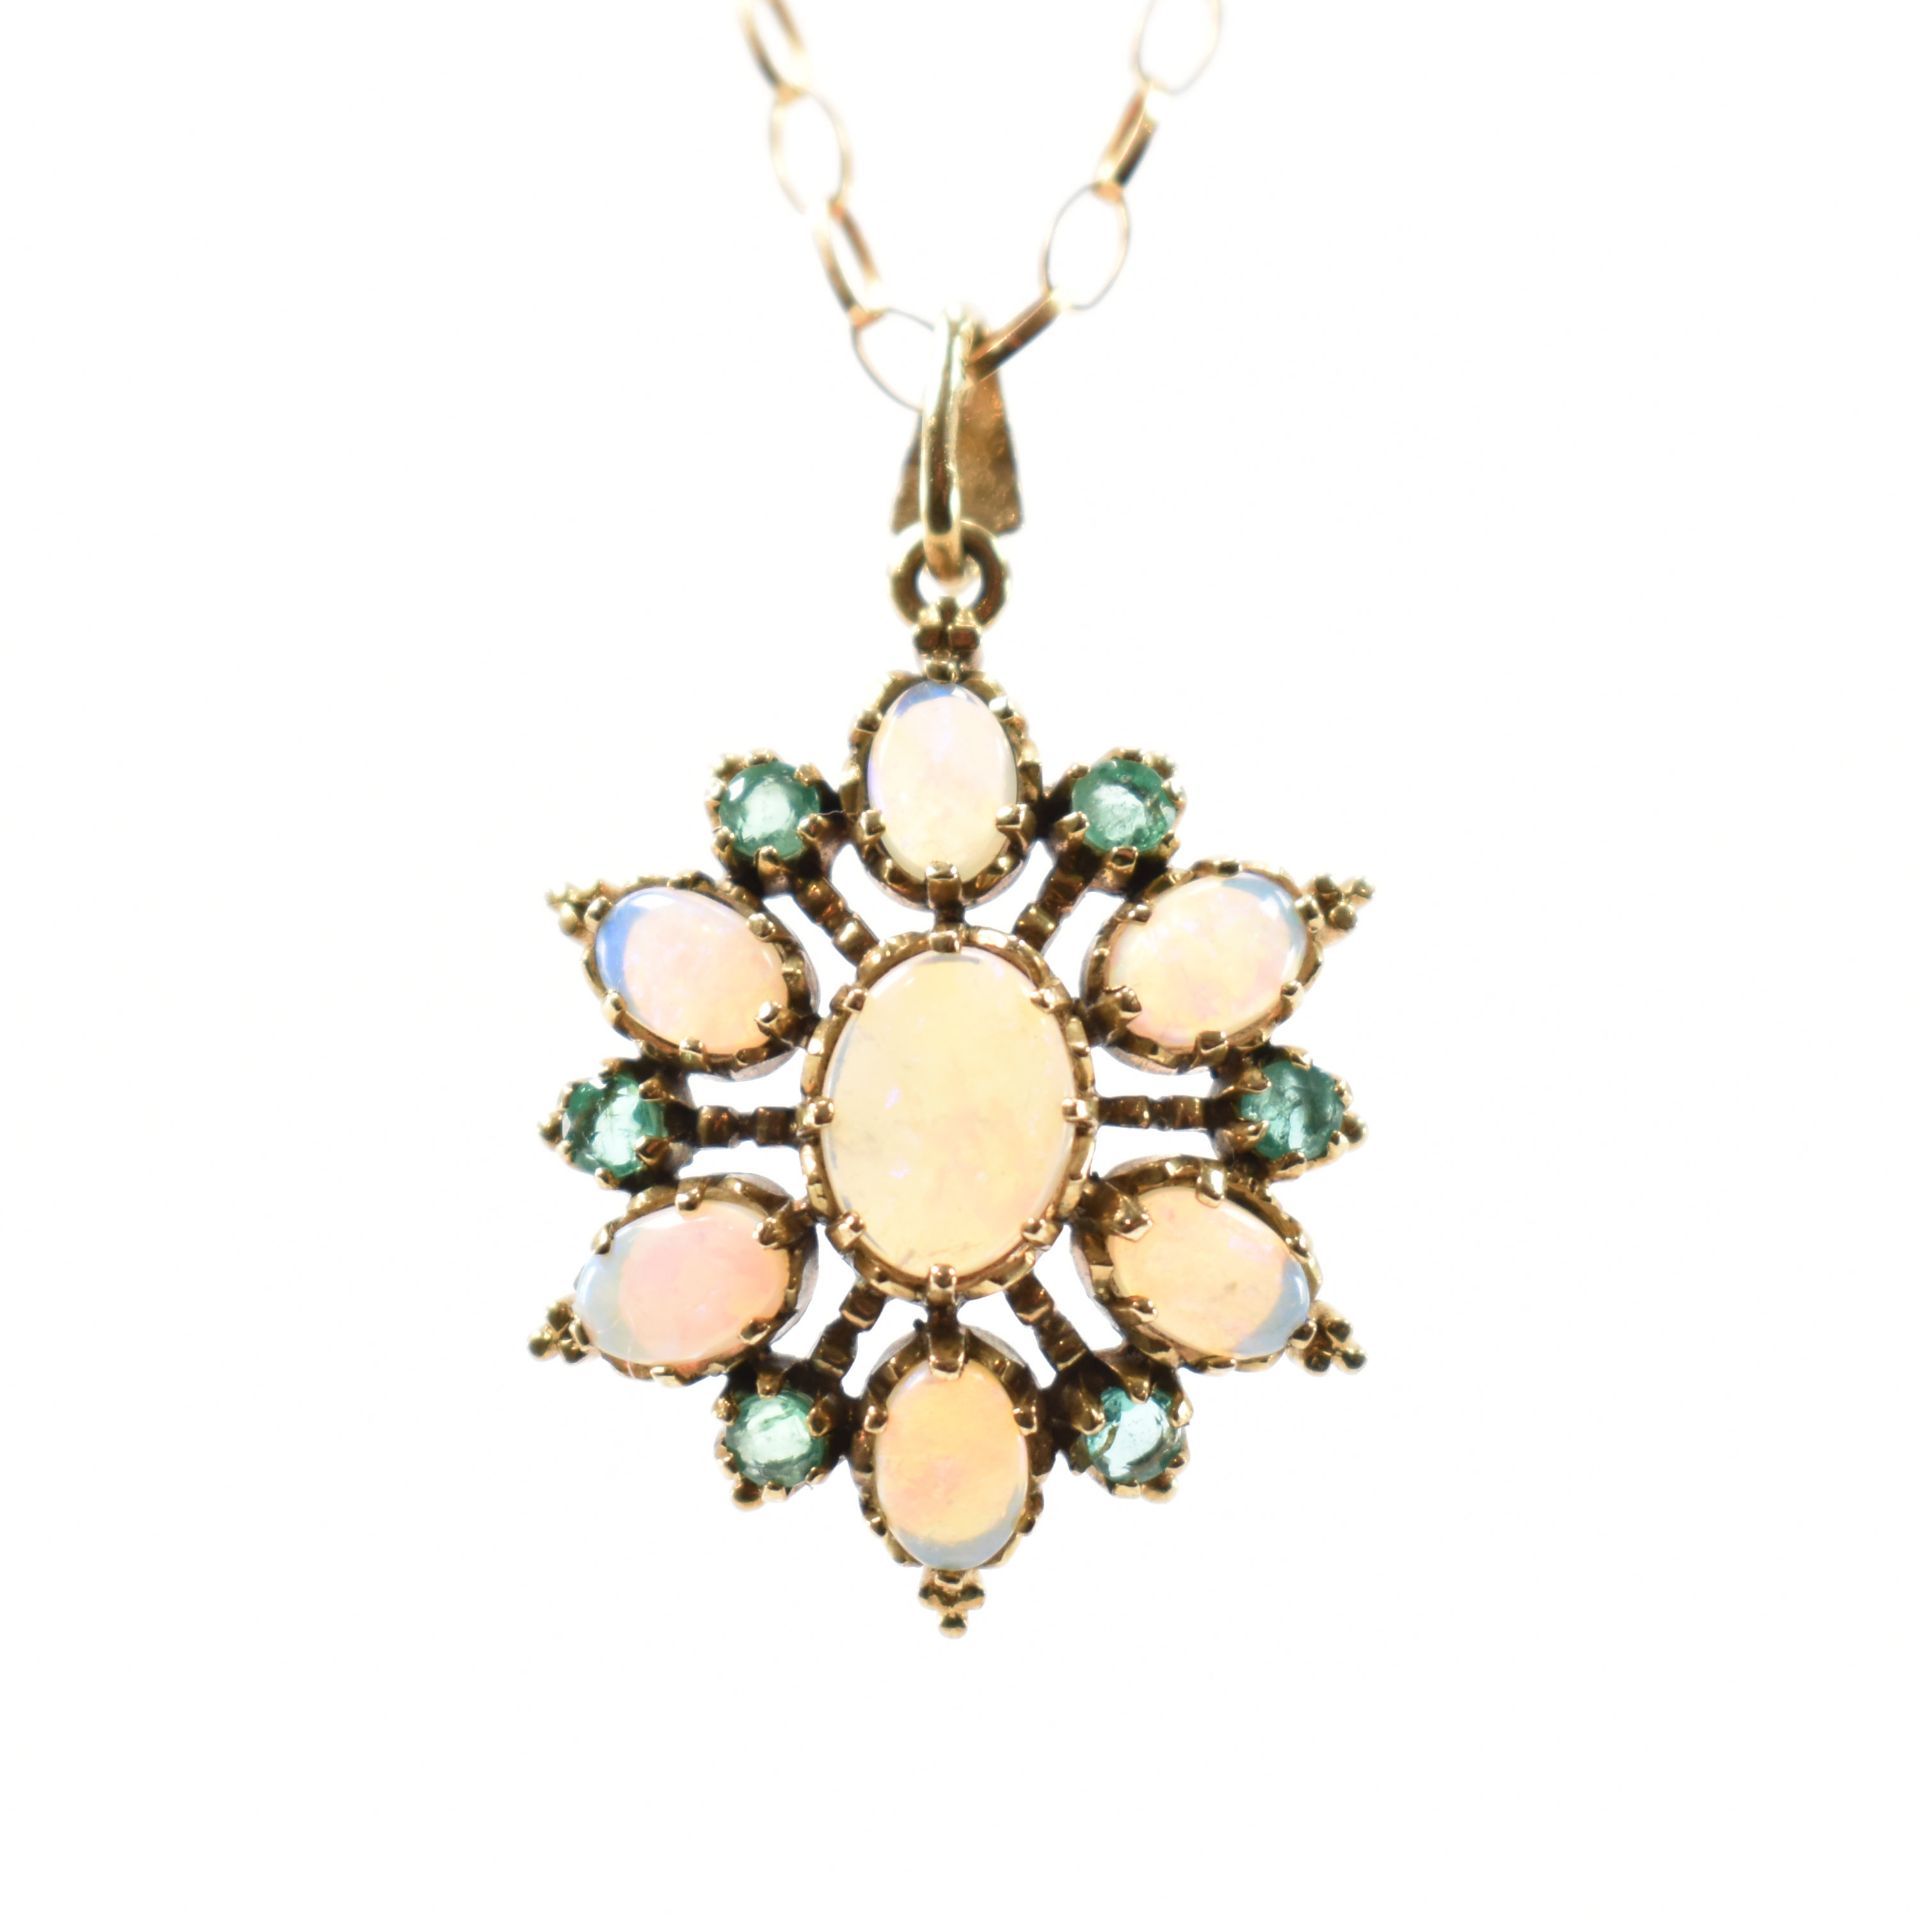 HALLMARKED 9CT GOLD OPAL & GREEN STONE PENDANT NECKLACE - Image 2 of 6